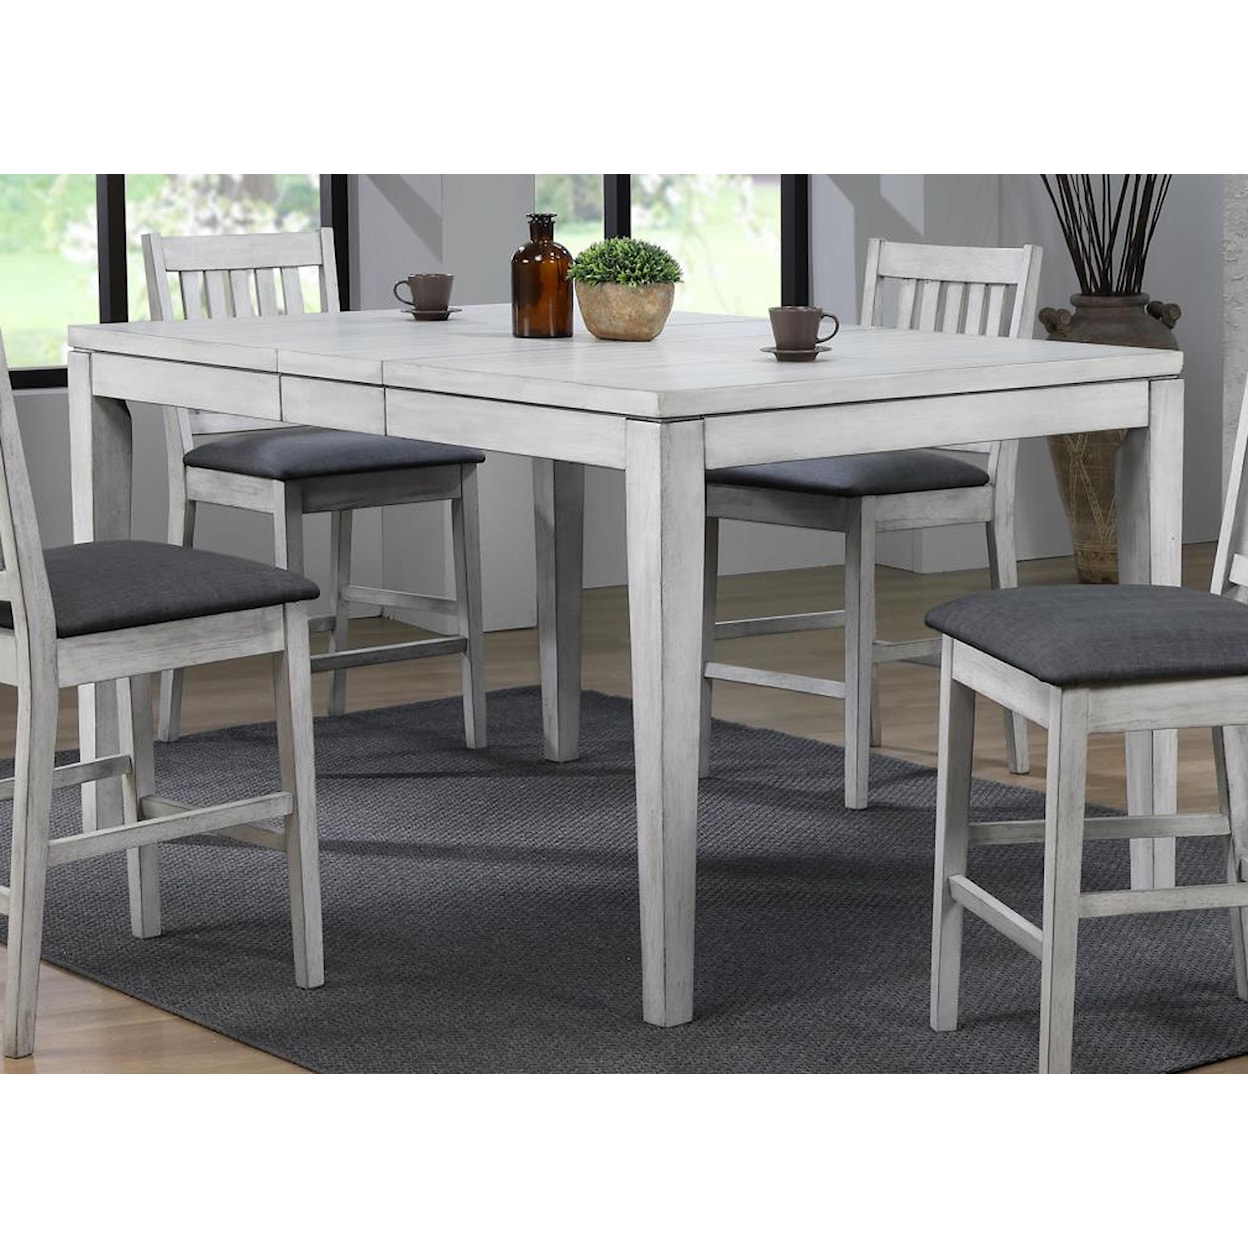 E.C.I. Furniture Summer Winds 5 Piece Counter Height Dining Room